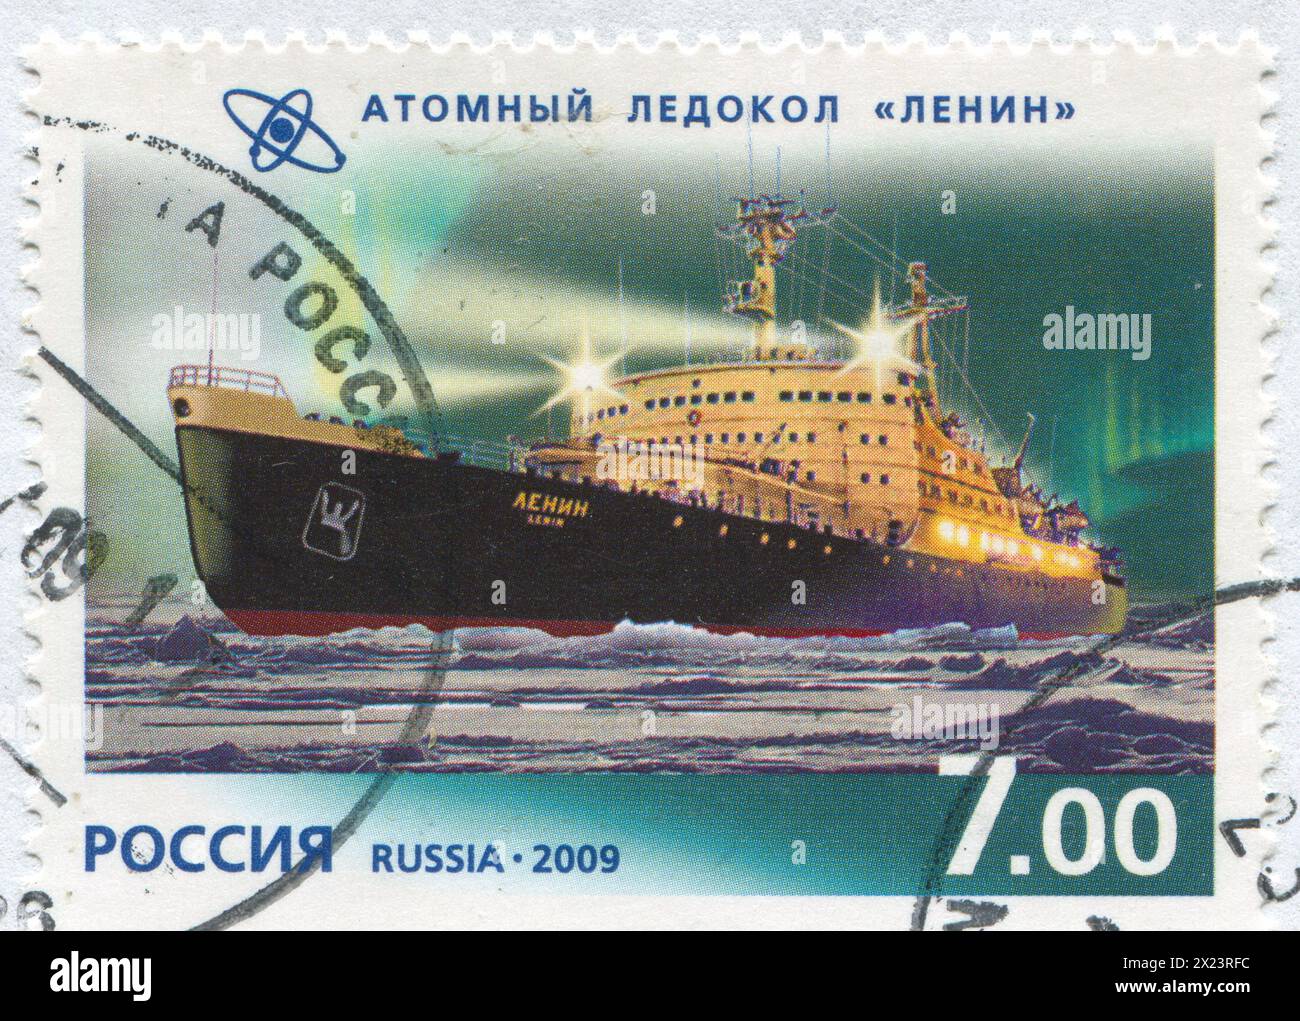 RUSSIA - CIRCA 2009: stamp printed by Russia, shows Nuclear icebreaker Lenin, circa 2009 Stock Photo